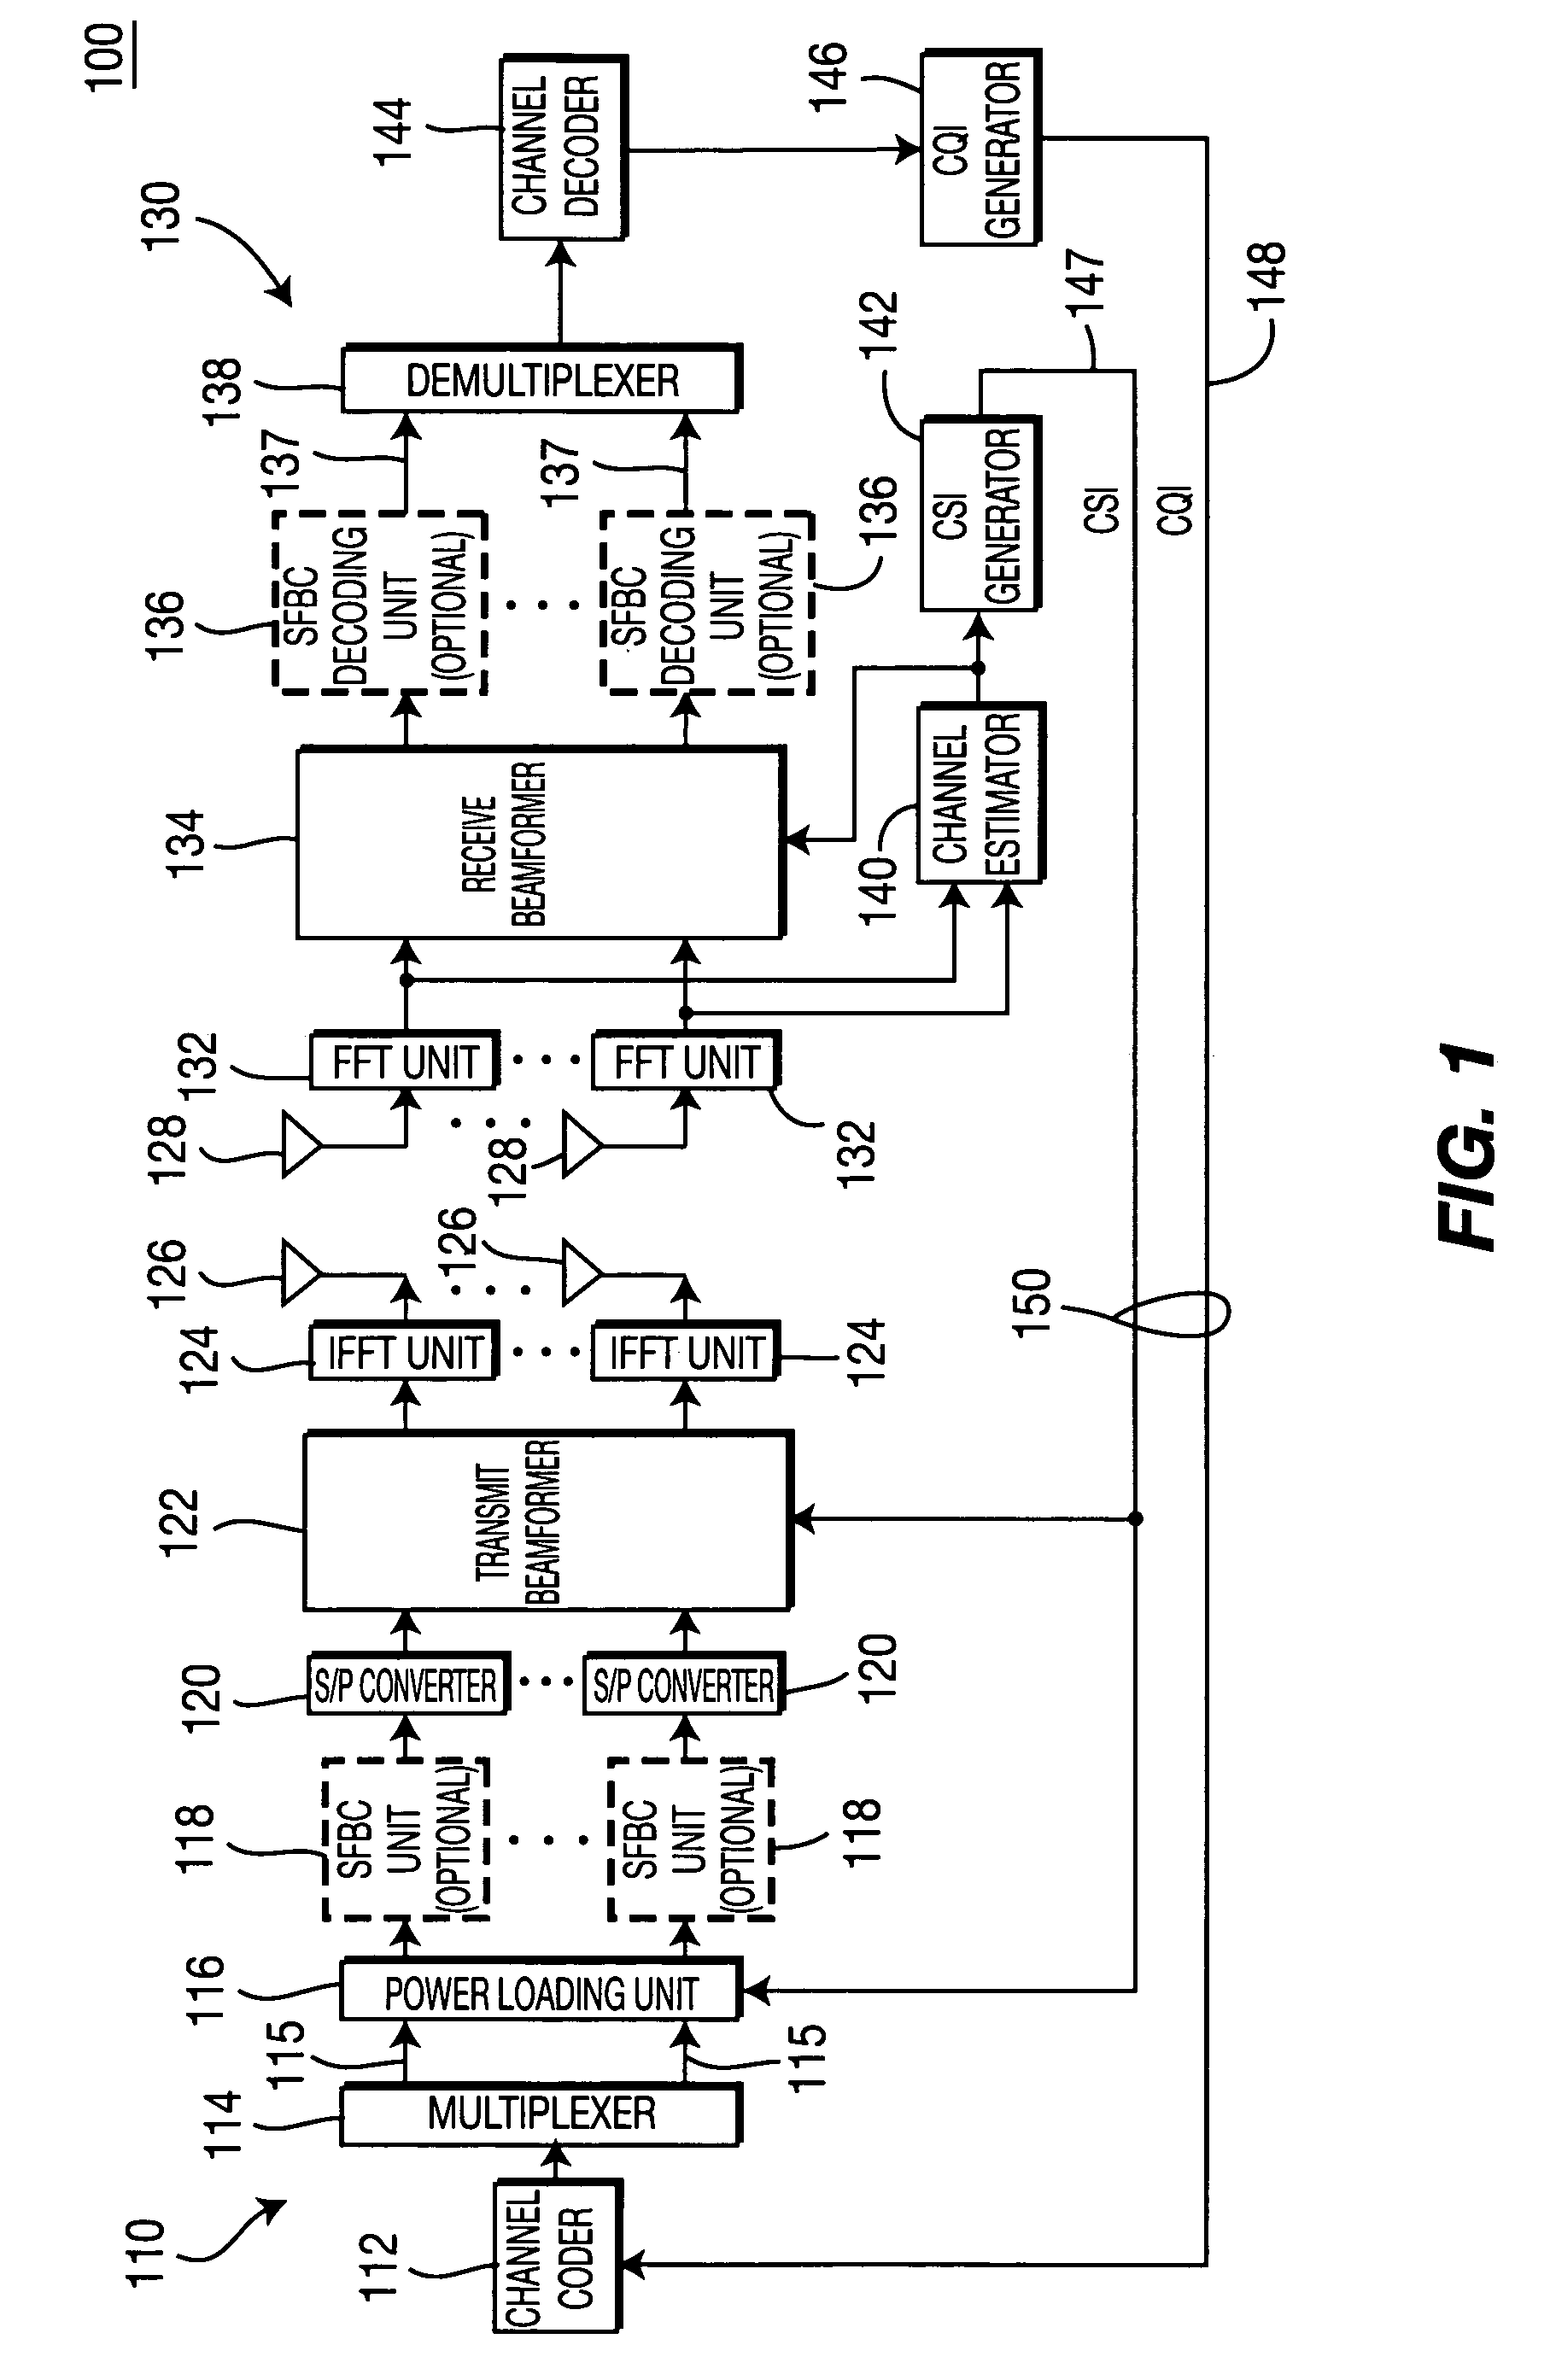 Method and apparatus for combining space-frequency block coding, spatial multiplexing and beamforming in a MIMO-OFDM system